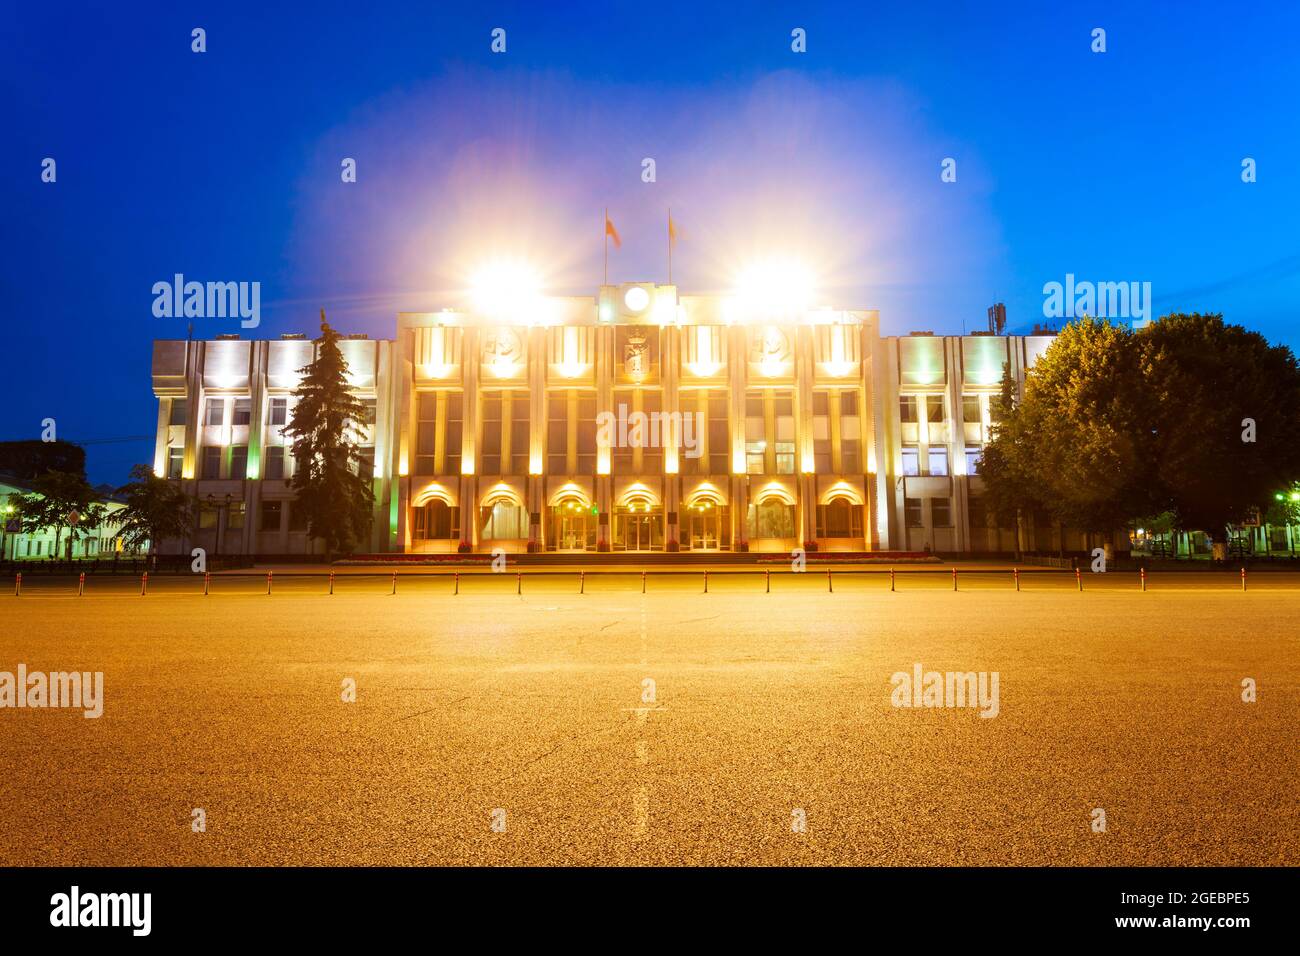 Yaroslavl regional government administration building at the Soviet square in Yaroslavl city, Golden Ring of Russia at night Stock Photo